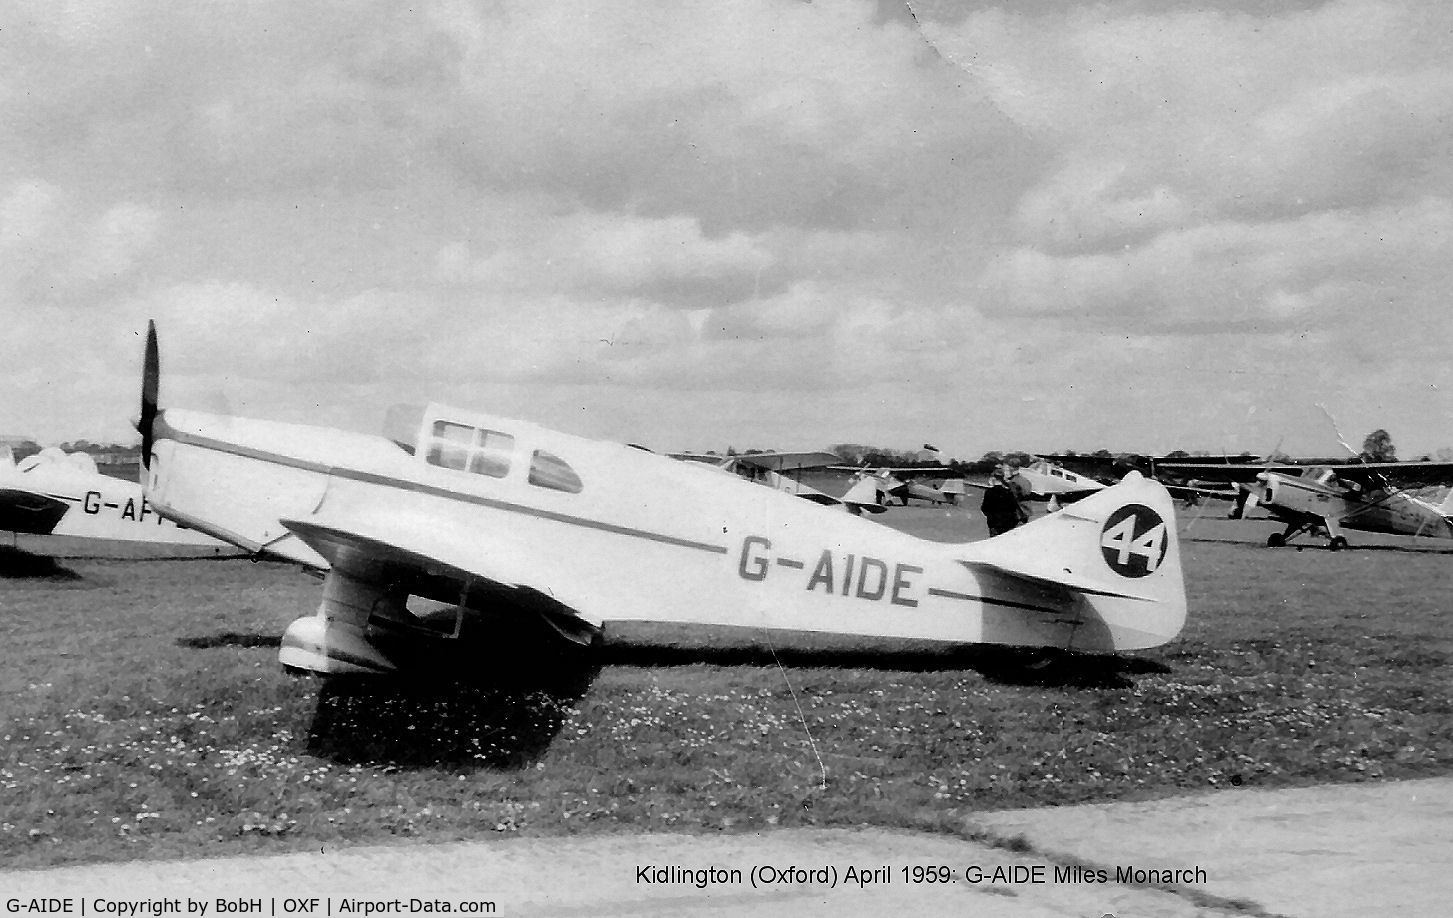 G-AIDE, 1938 Miles M.17 Monarch C/N 793, G-AIDE at Kidlington in April 1959: 
(In 1957 this aircraft won the Goodyear Trophy & came 3rd in the Kings Cup. In 1958 it won the Norton Griffiths Trophy & was 2nd in the Osram Cup (Pilot W.P.Bowles): Source Wikipedia)